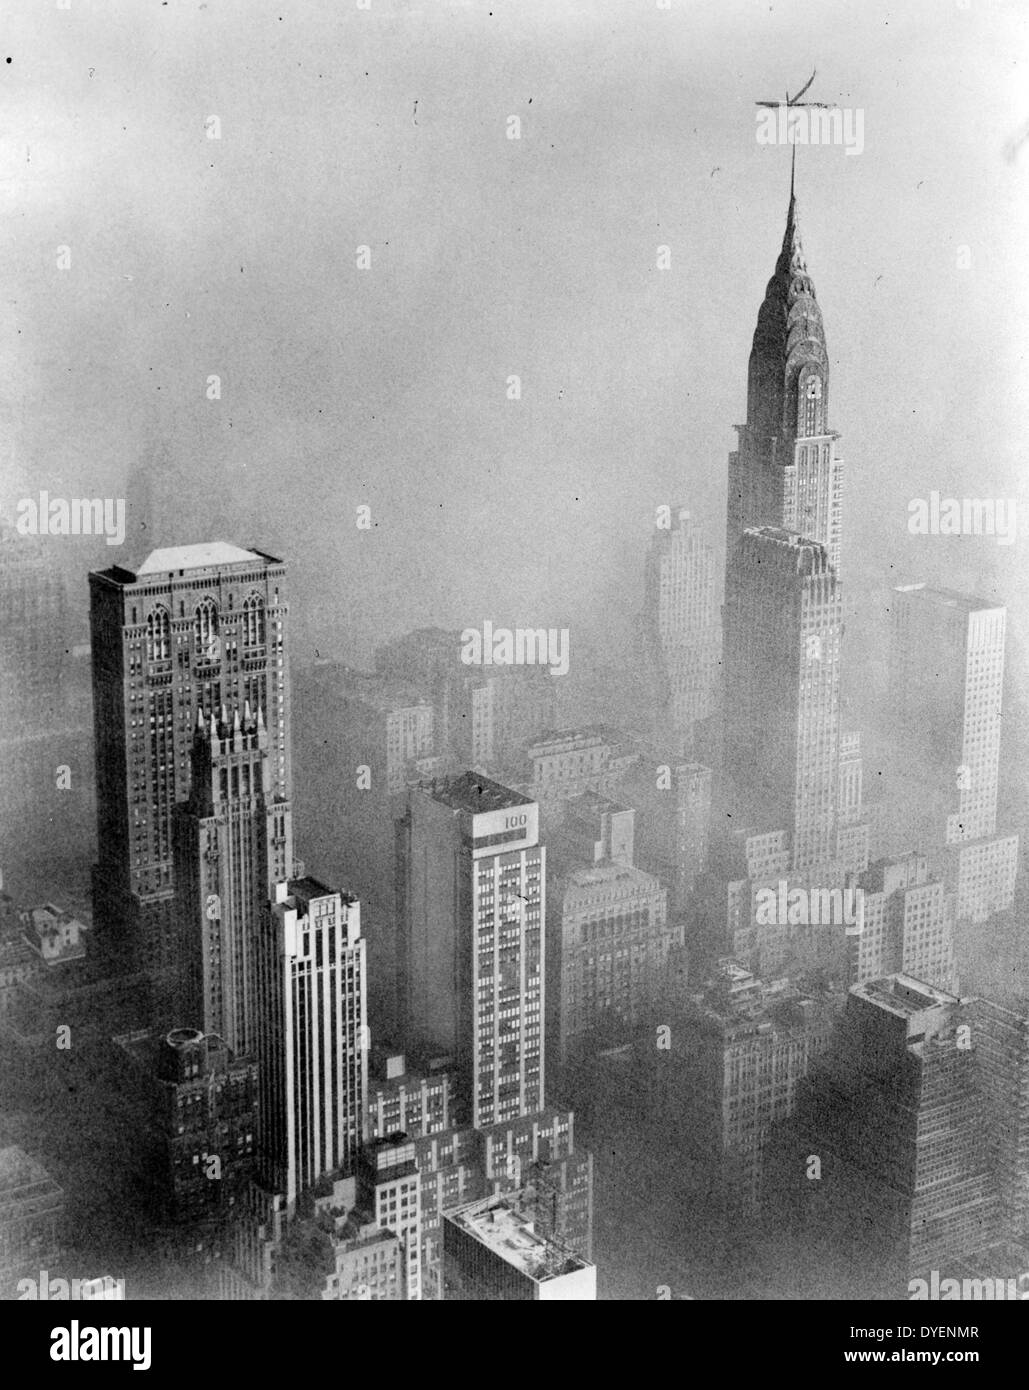 City smog pollution Black and White Stock Photos & Images - Alamy